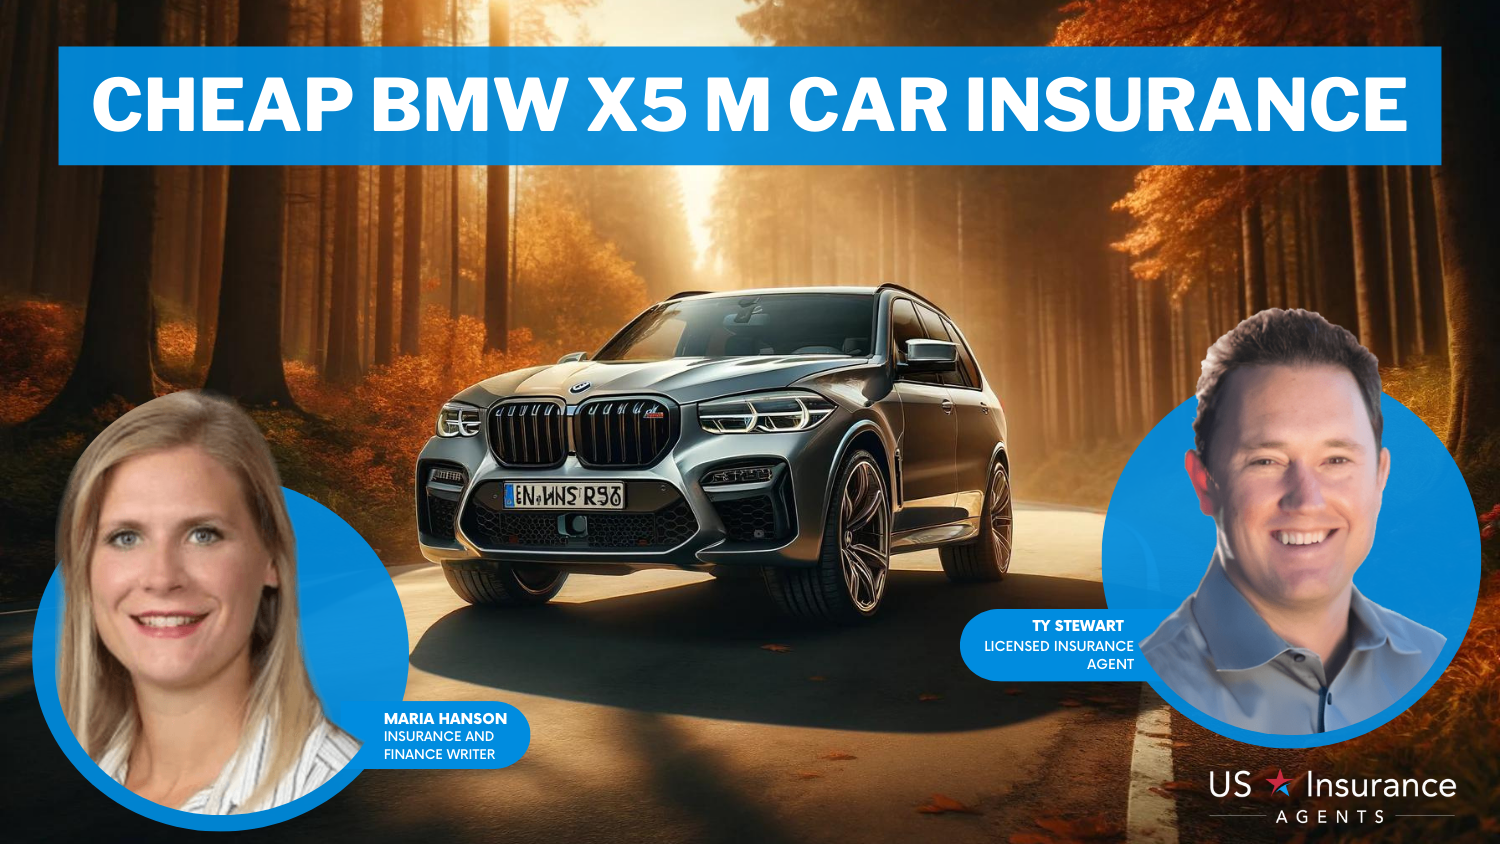 Cheap BMW X5 M Car Insurance: Erie, State Farm, and Safeco